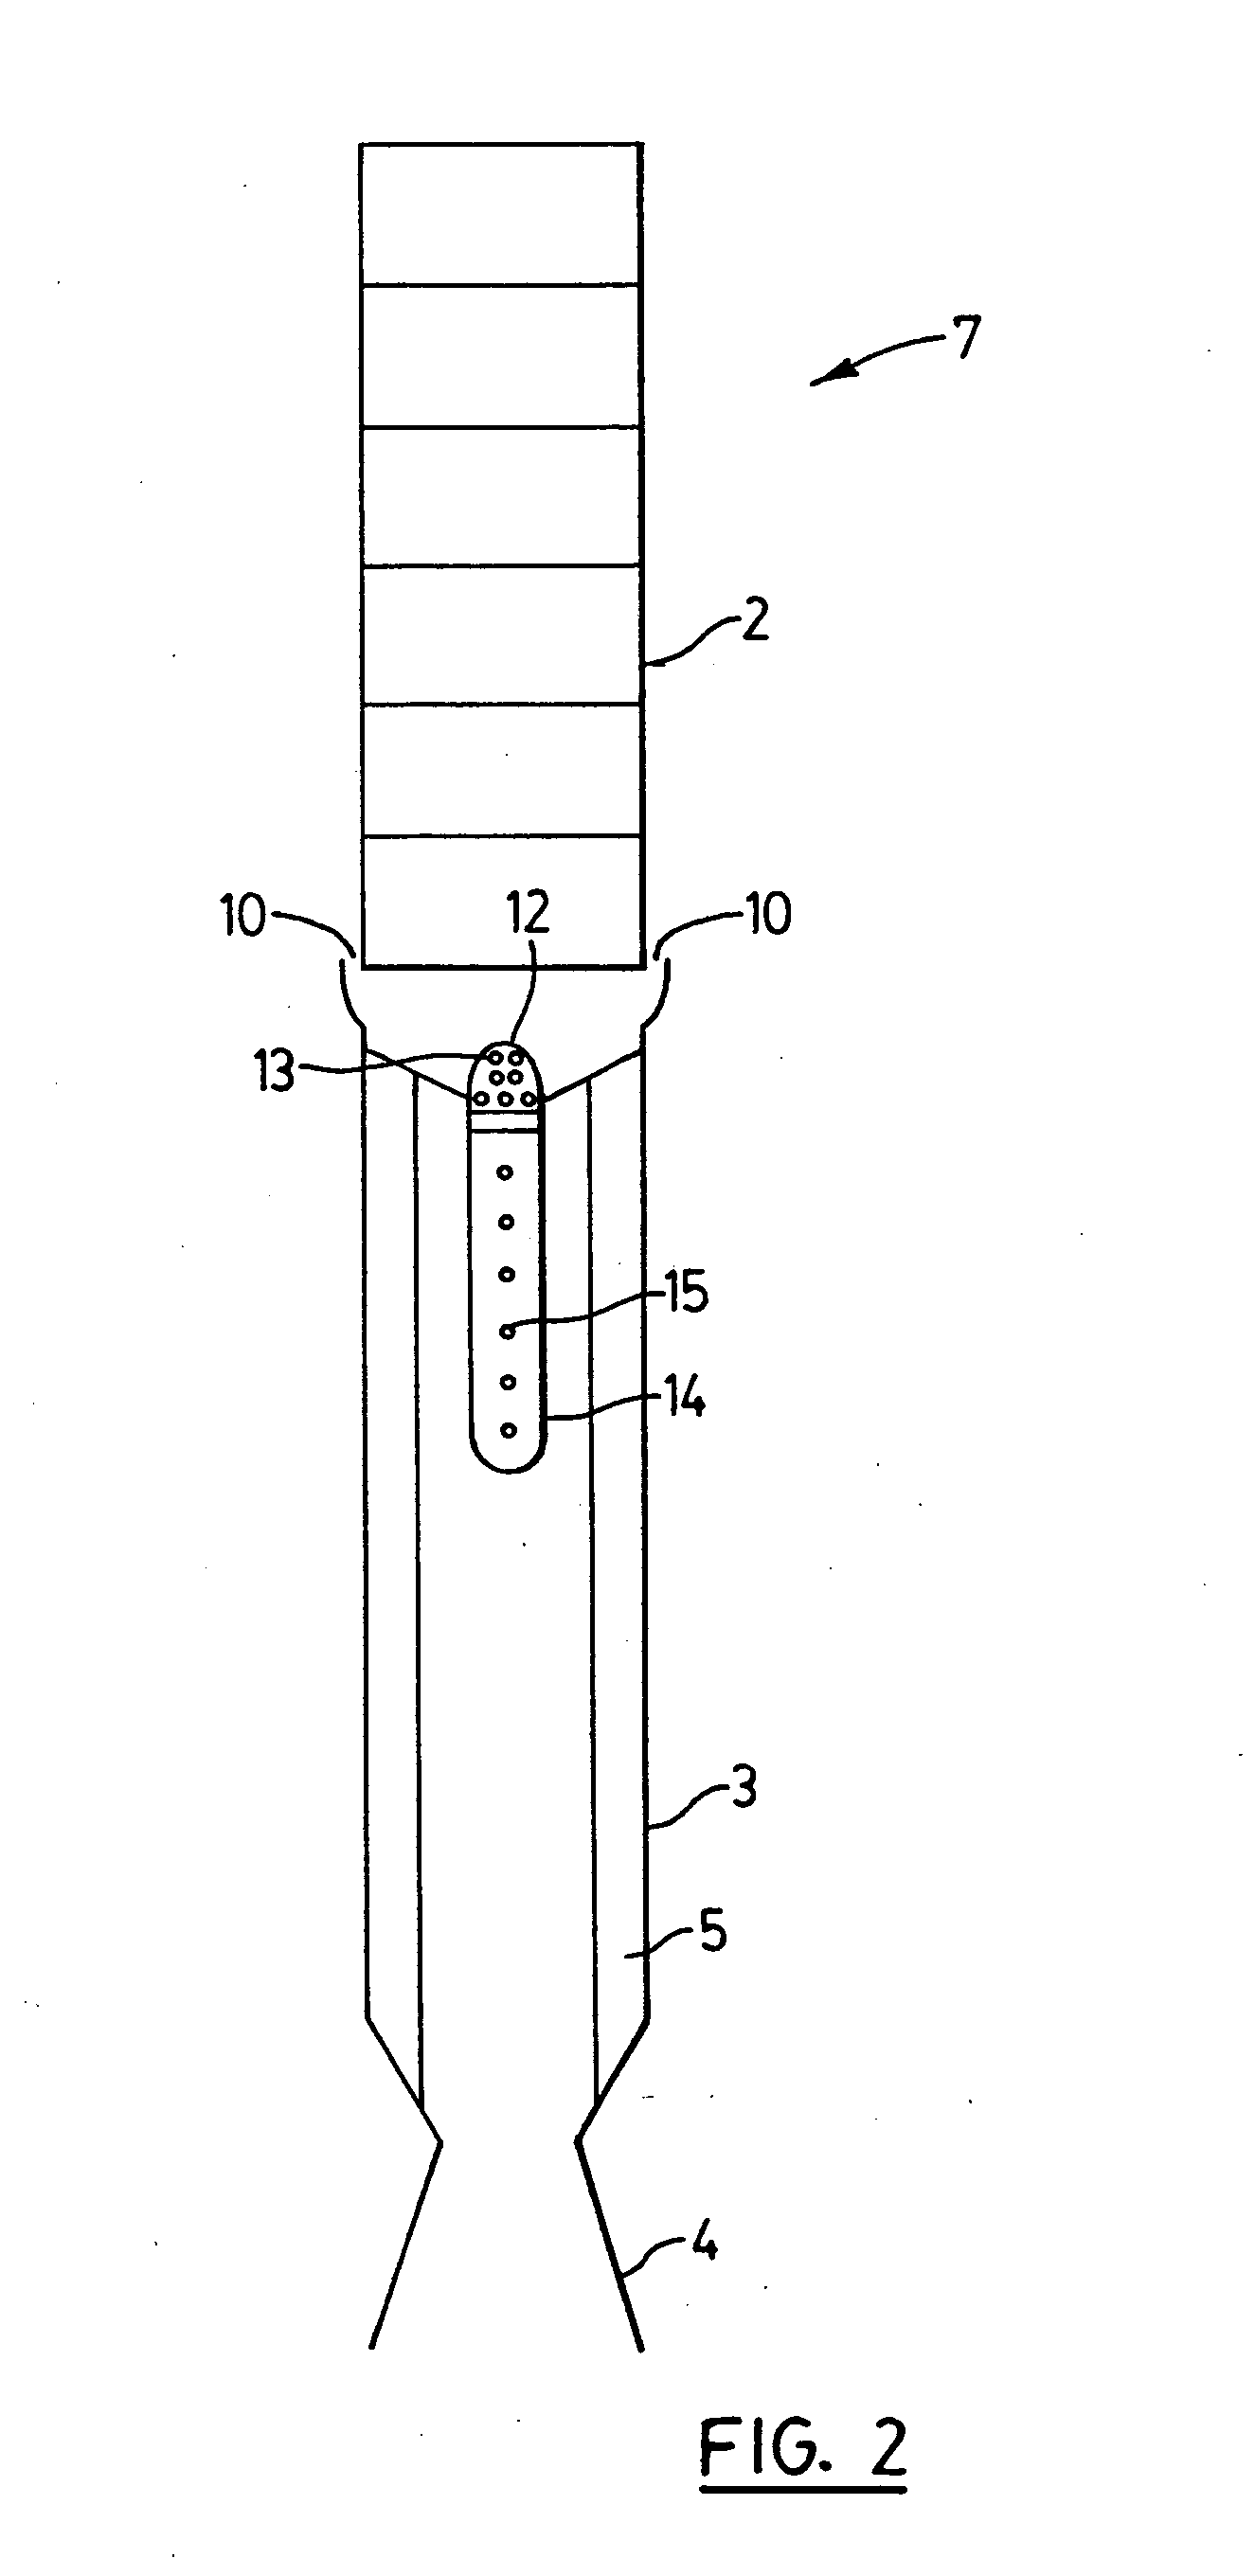 Oxidizer package for propellant system for rockets